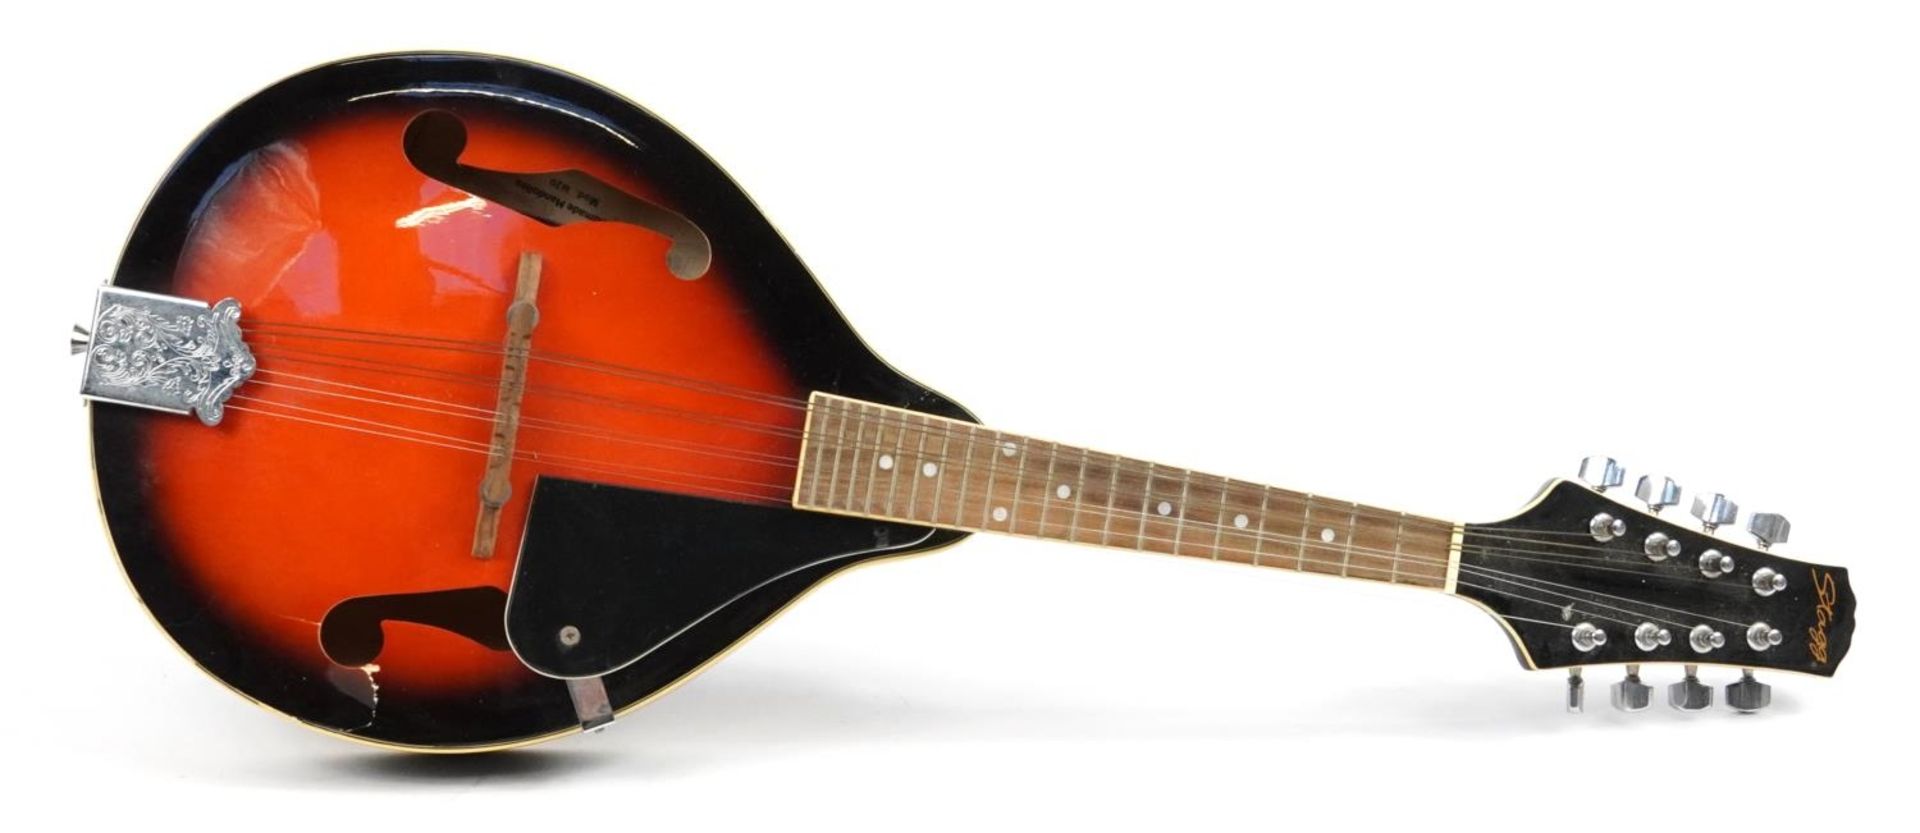 Stagg hand made mandolin model M20, numbered 0805/72, 79cm in length For further information on this